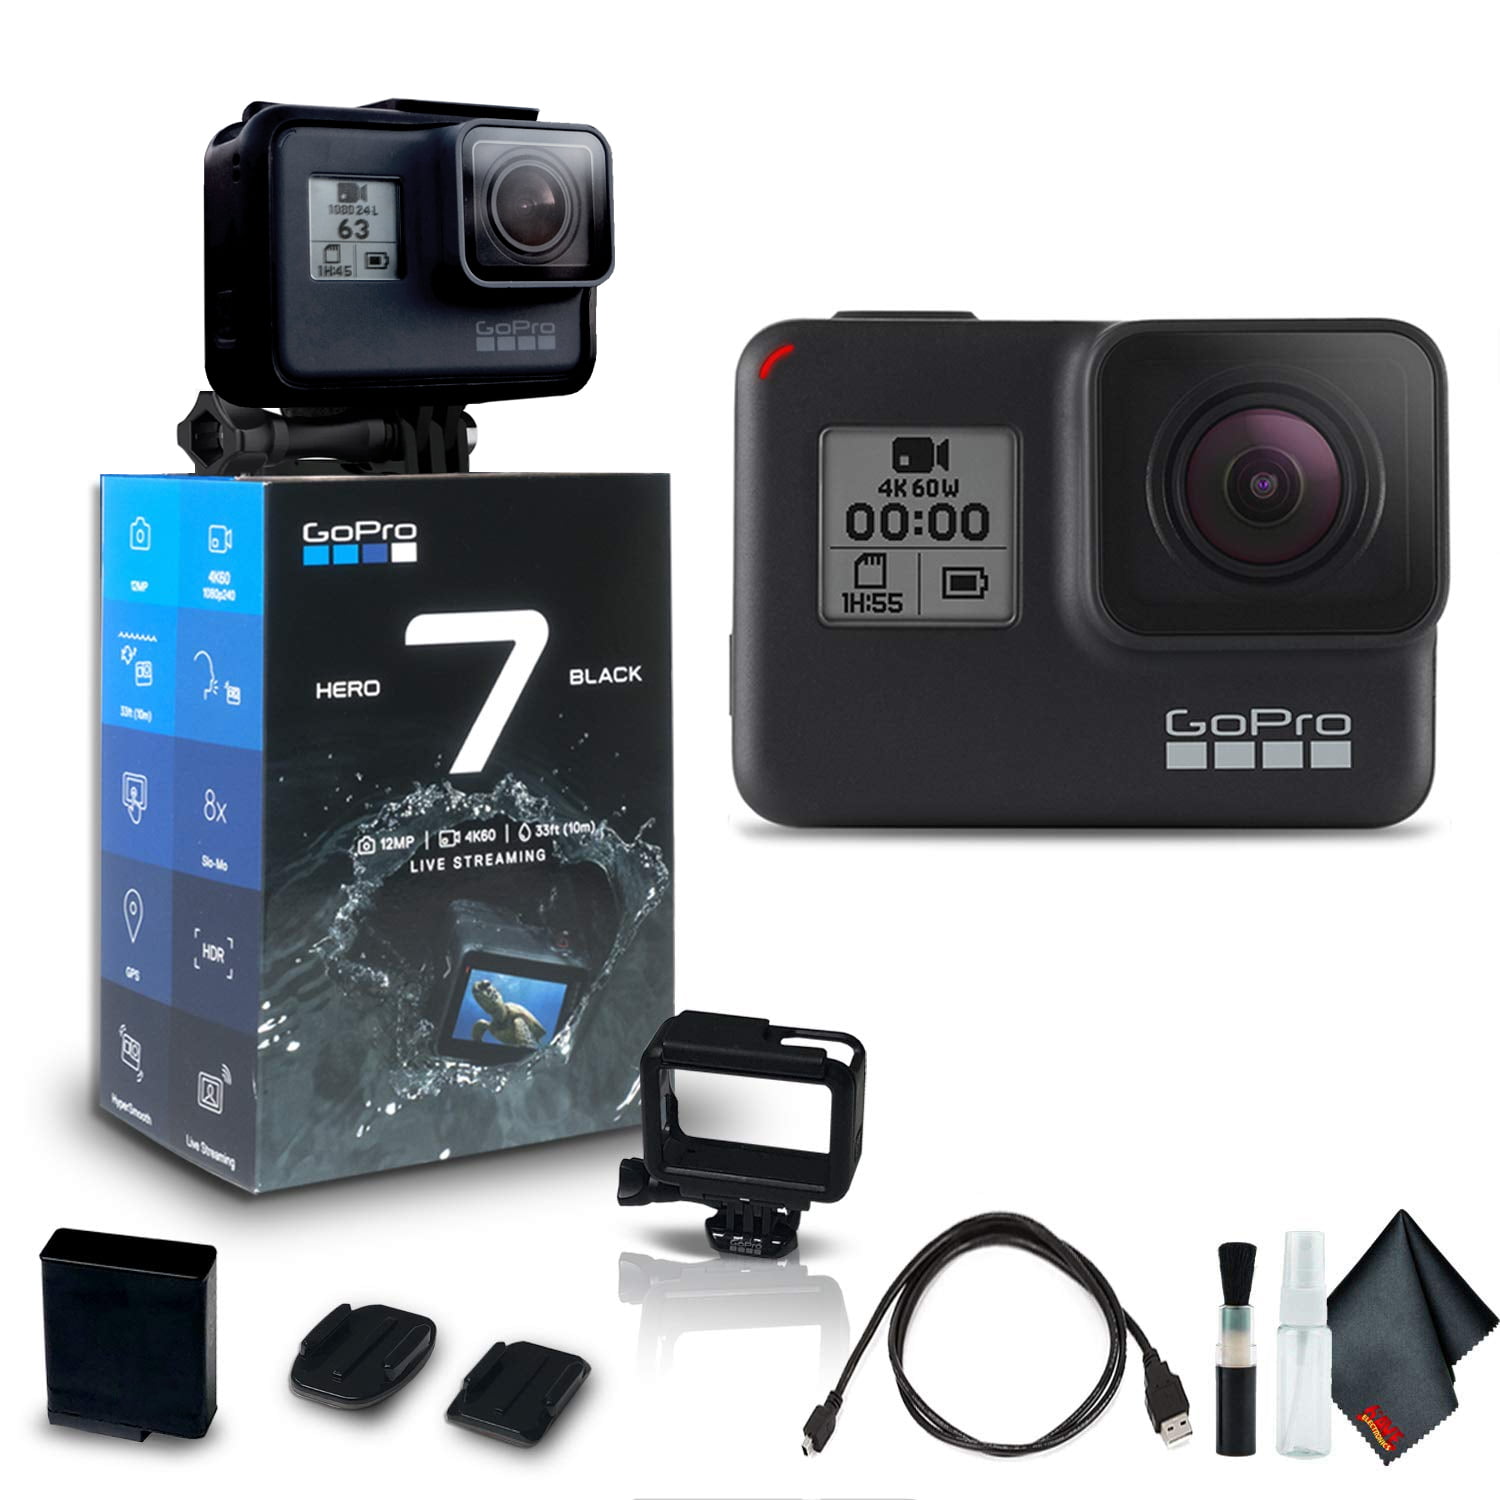 GoPro HERO7 Black - Waterproof Action Camera with Touch Screen